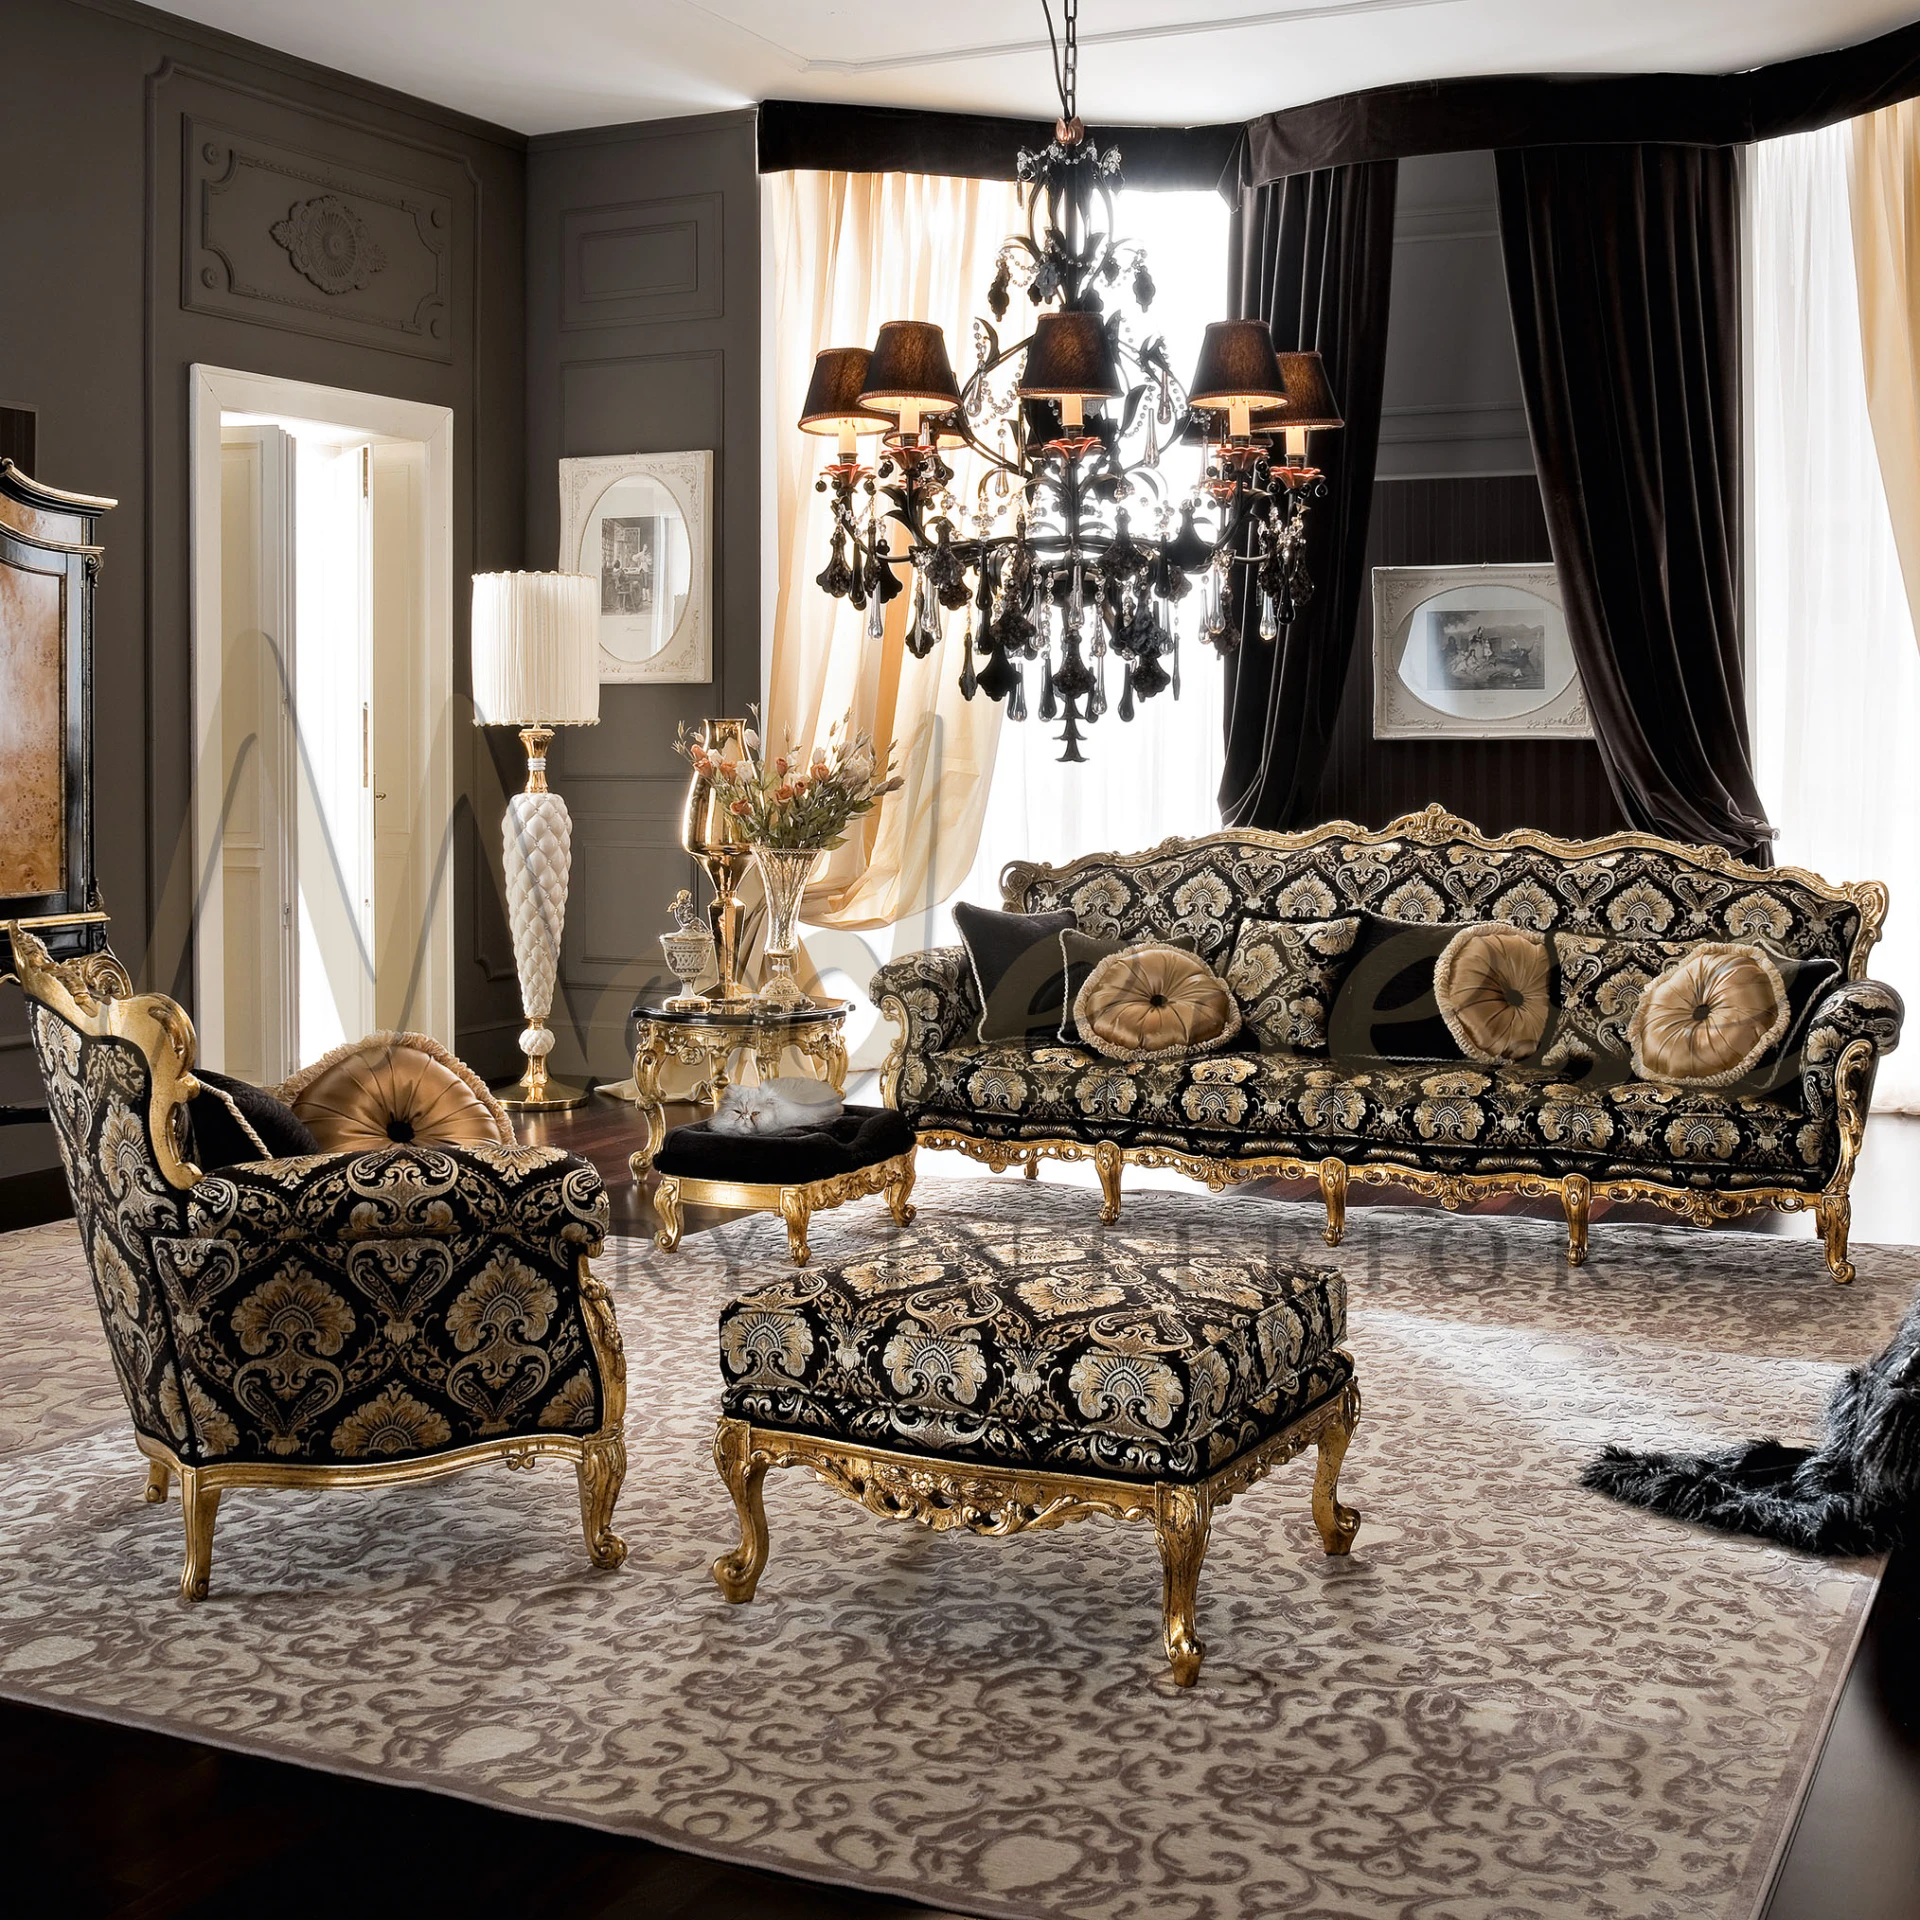 Luxurious Carved Baroque Armchair: A Statement of Timeless Elegance